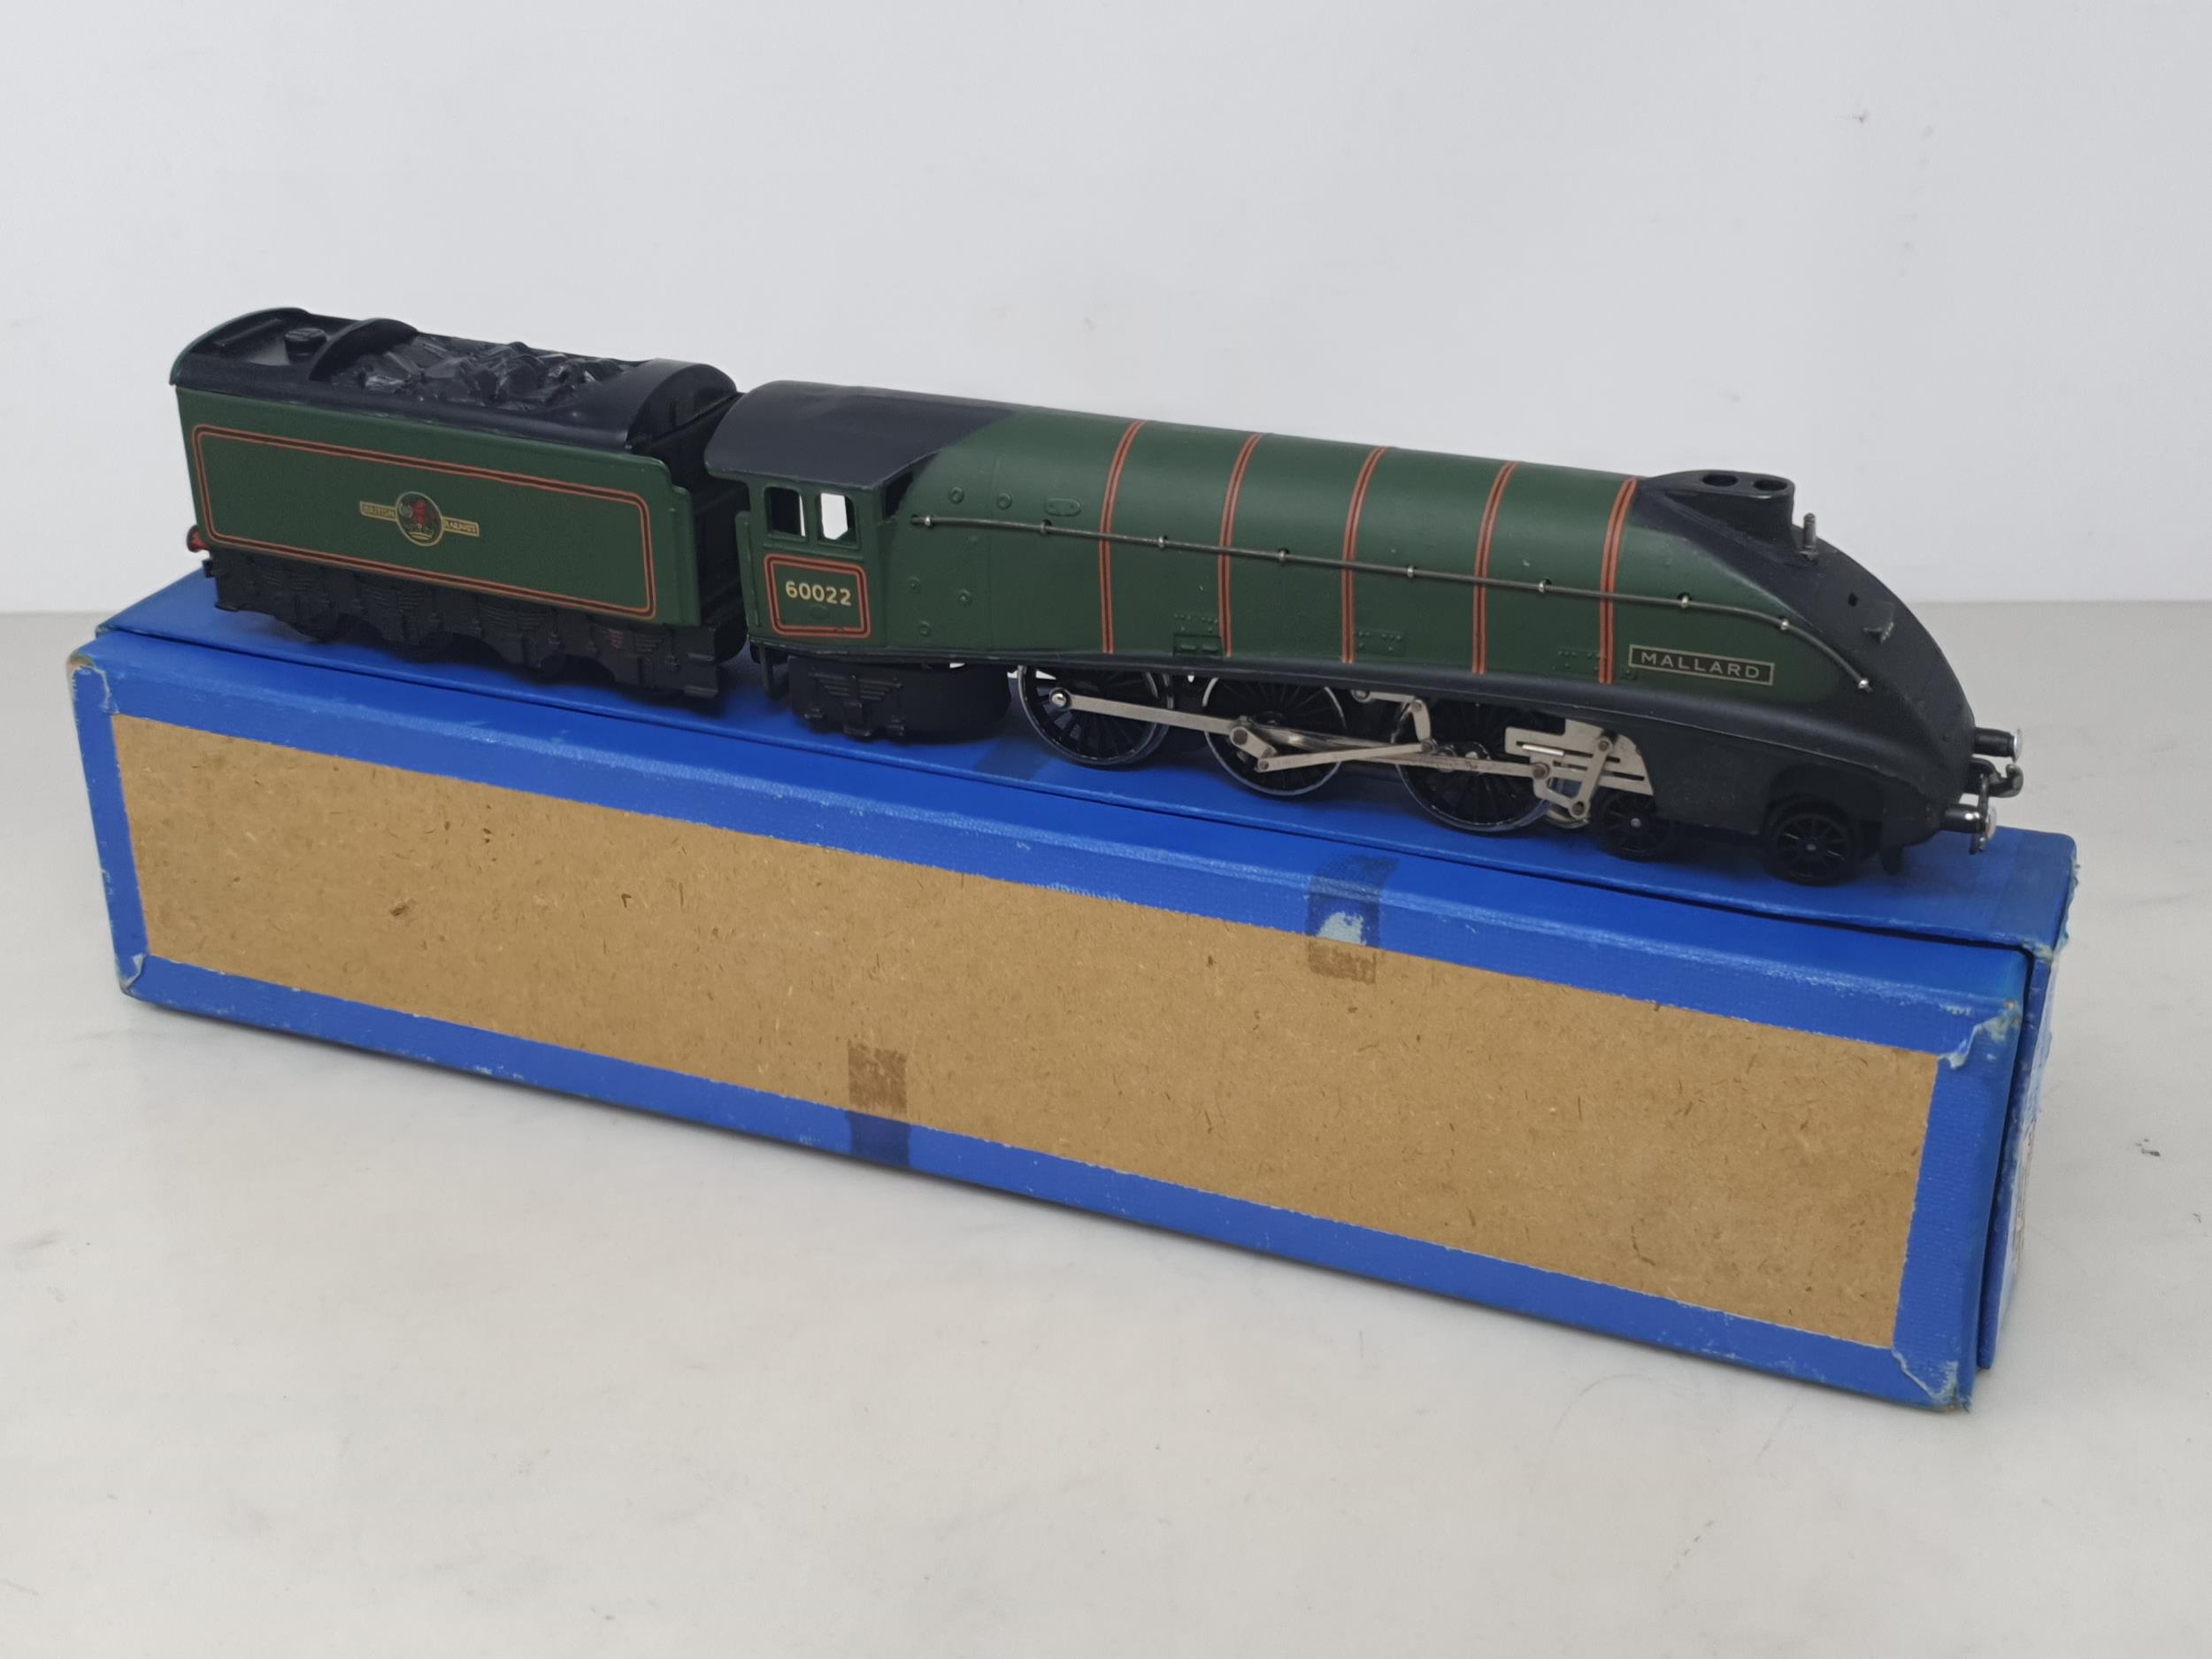 A boxed Hornby Dublo 3211 nickel silver 'Mallard' Locomotive, unused and in mint condition showing - Image 7 of 7